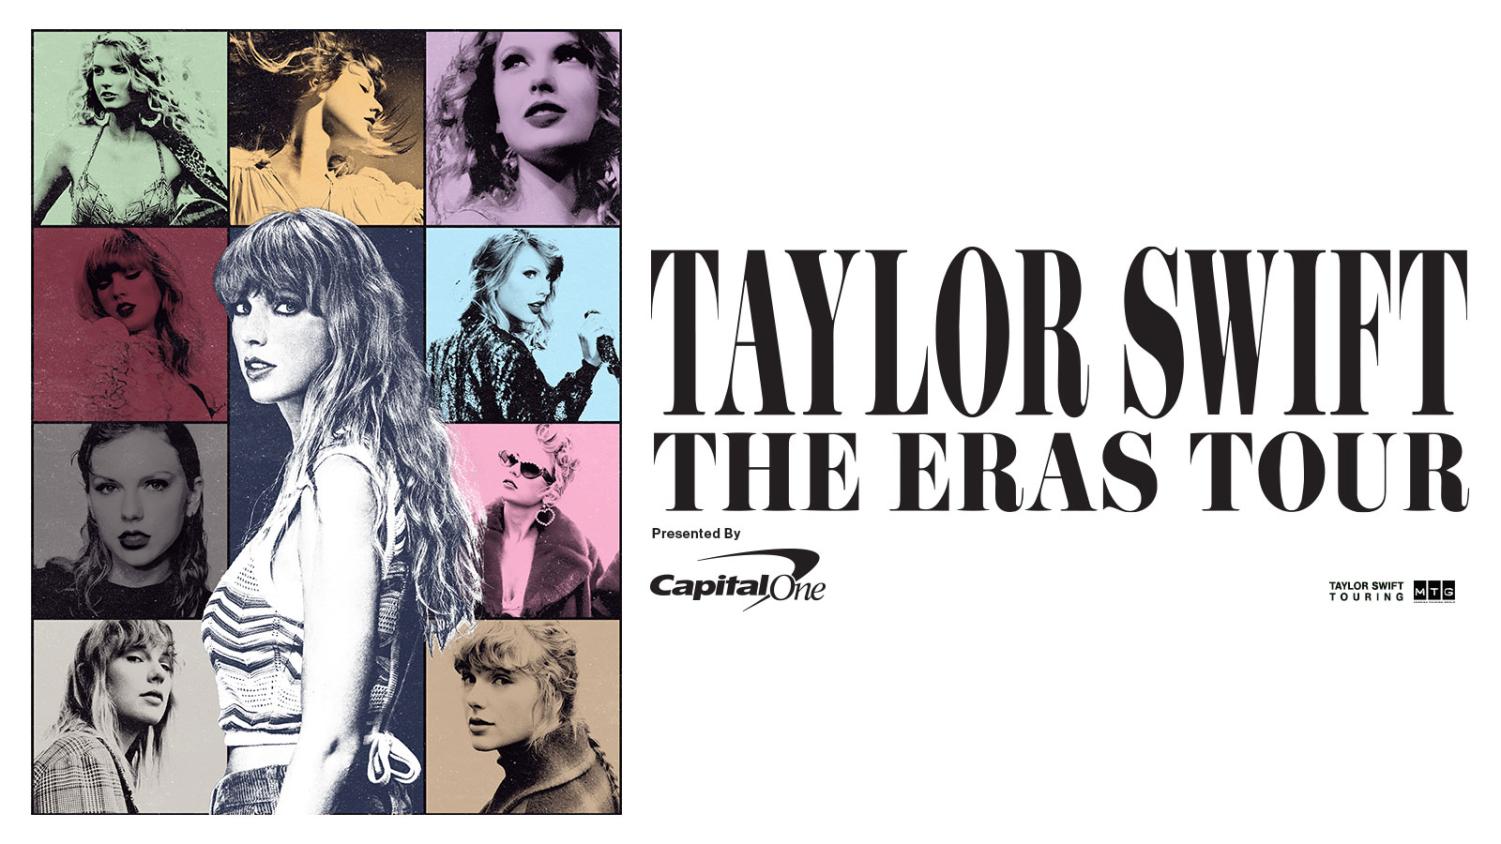 Taylor Swift Speak Now Era, Taylor Swift Eras Tour Poster - Print your  thoughts. Tell your stories.